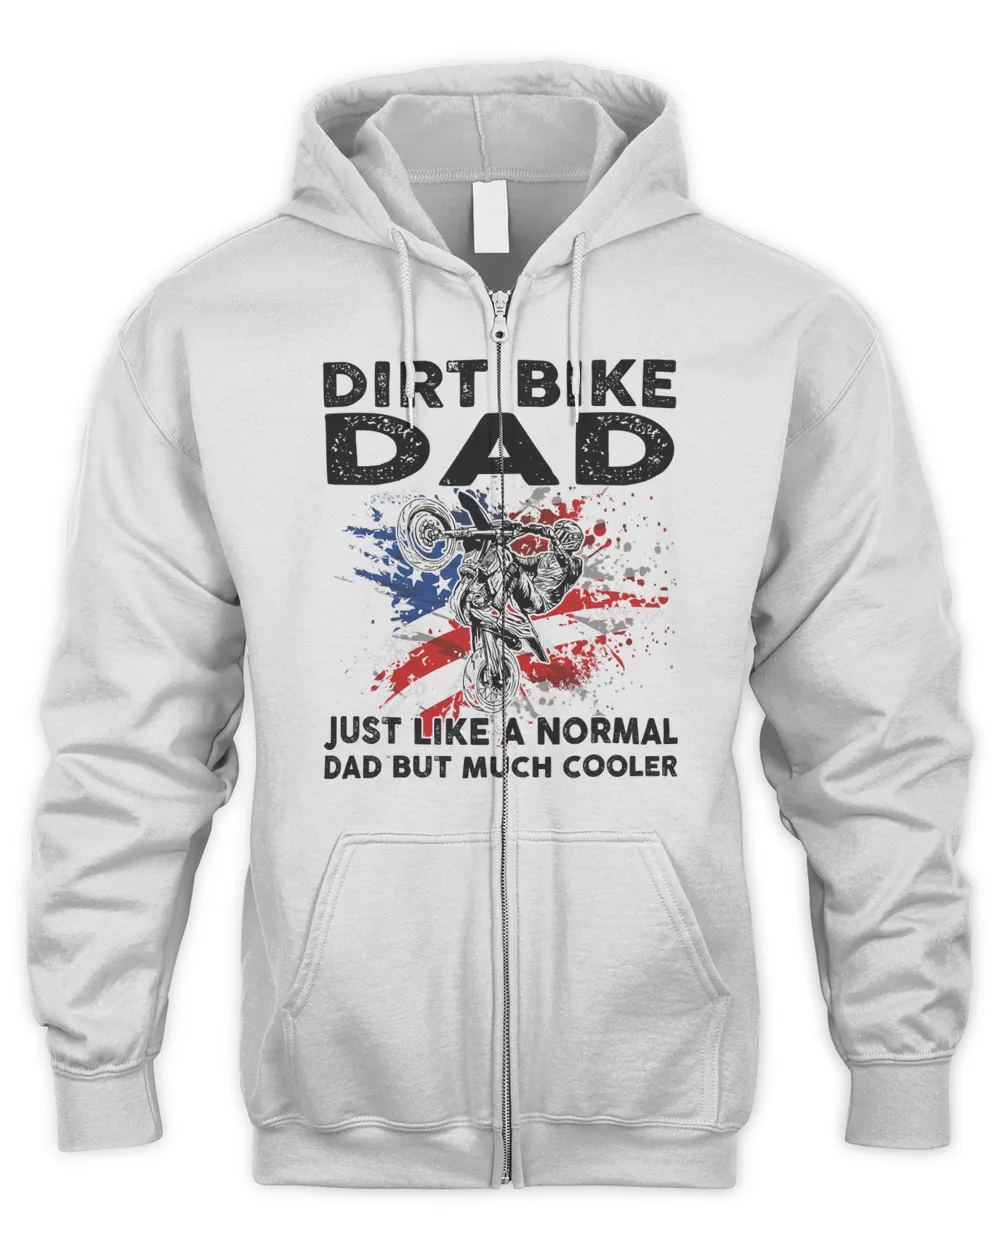 Motocross MX Dirt Bike dad like a normal dad but much cooler